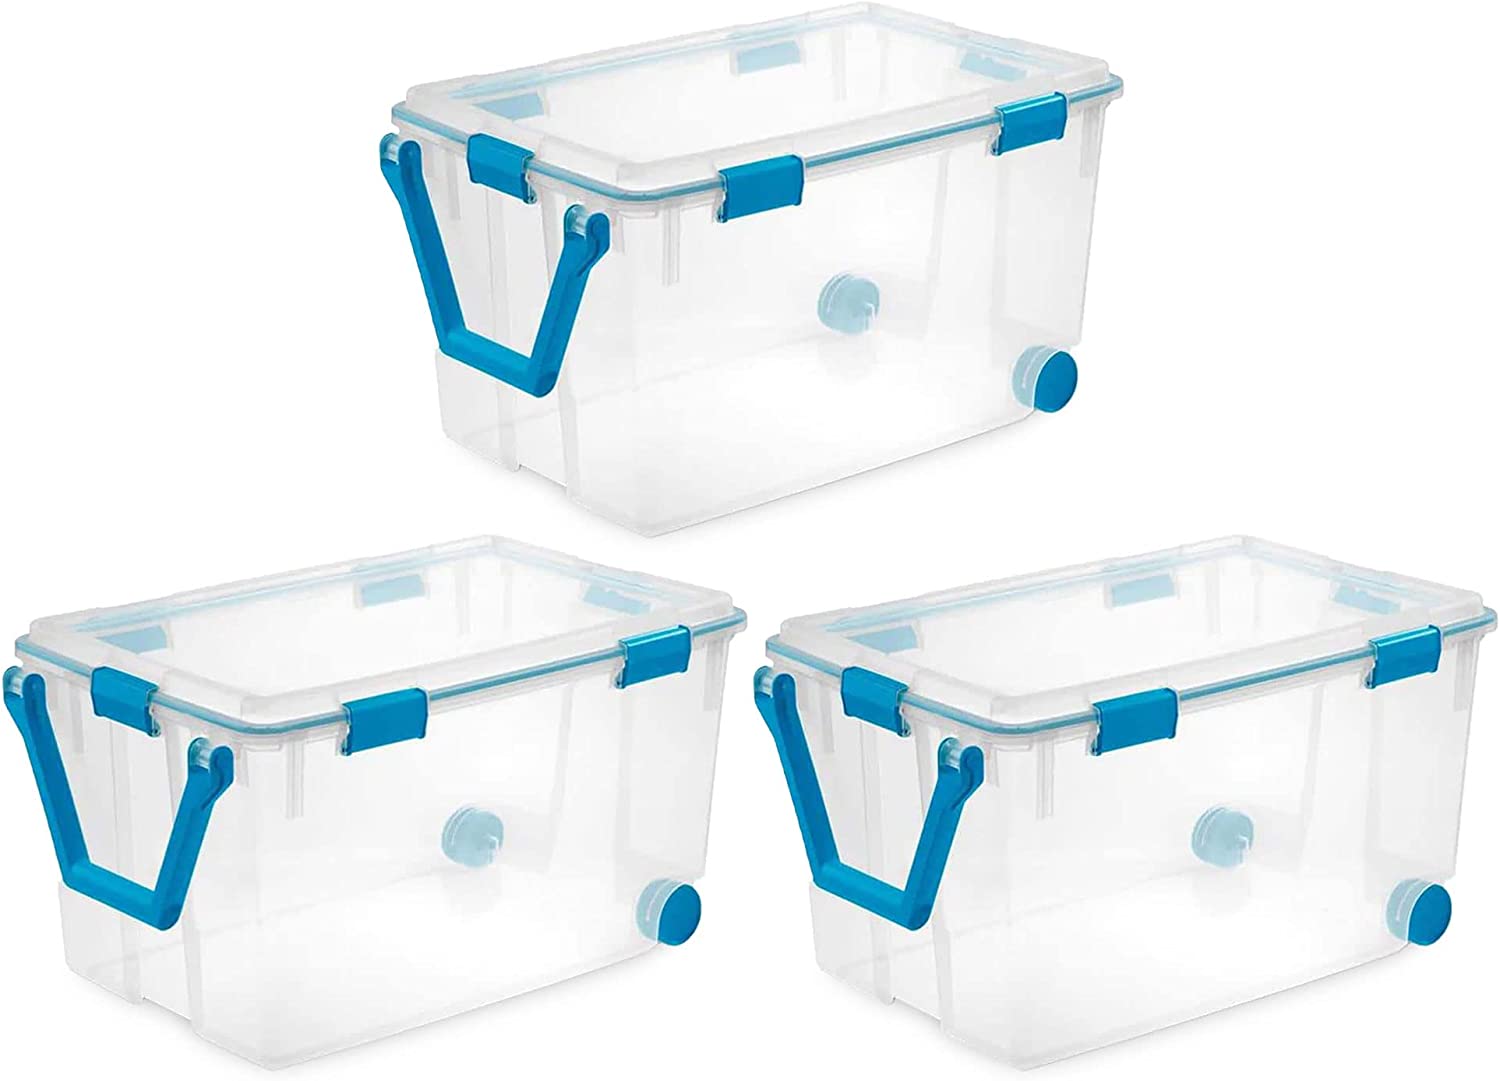 10 Best Storage Bins With Wheels For Your Home